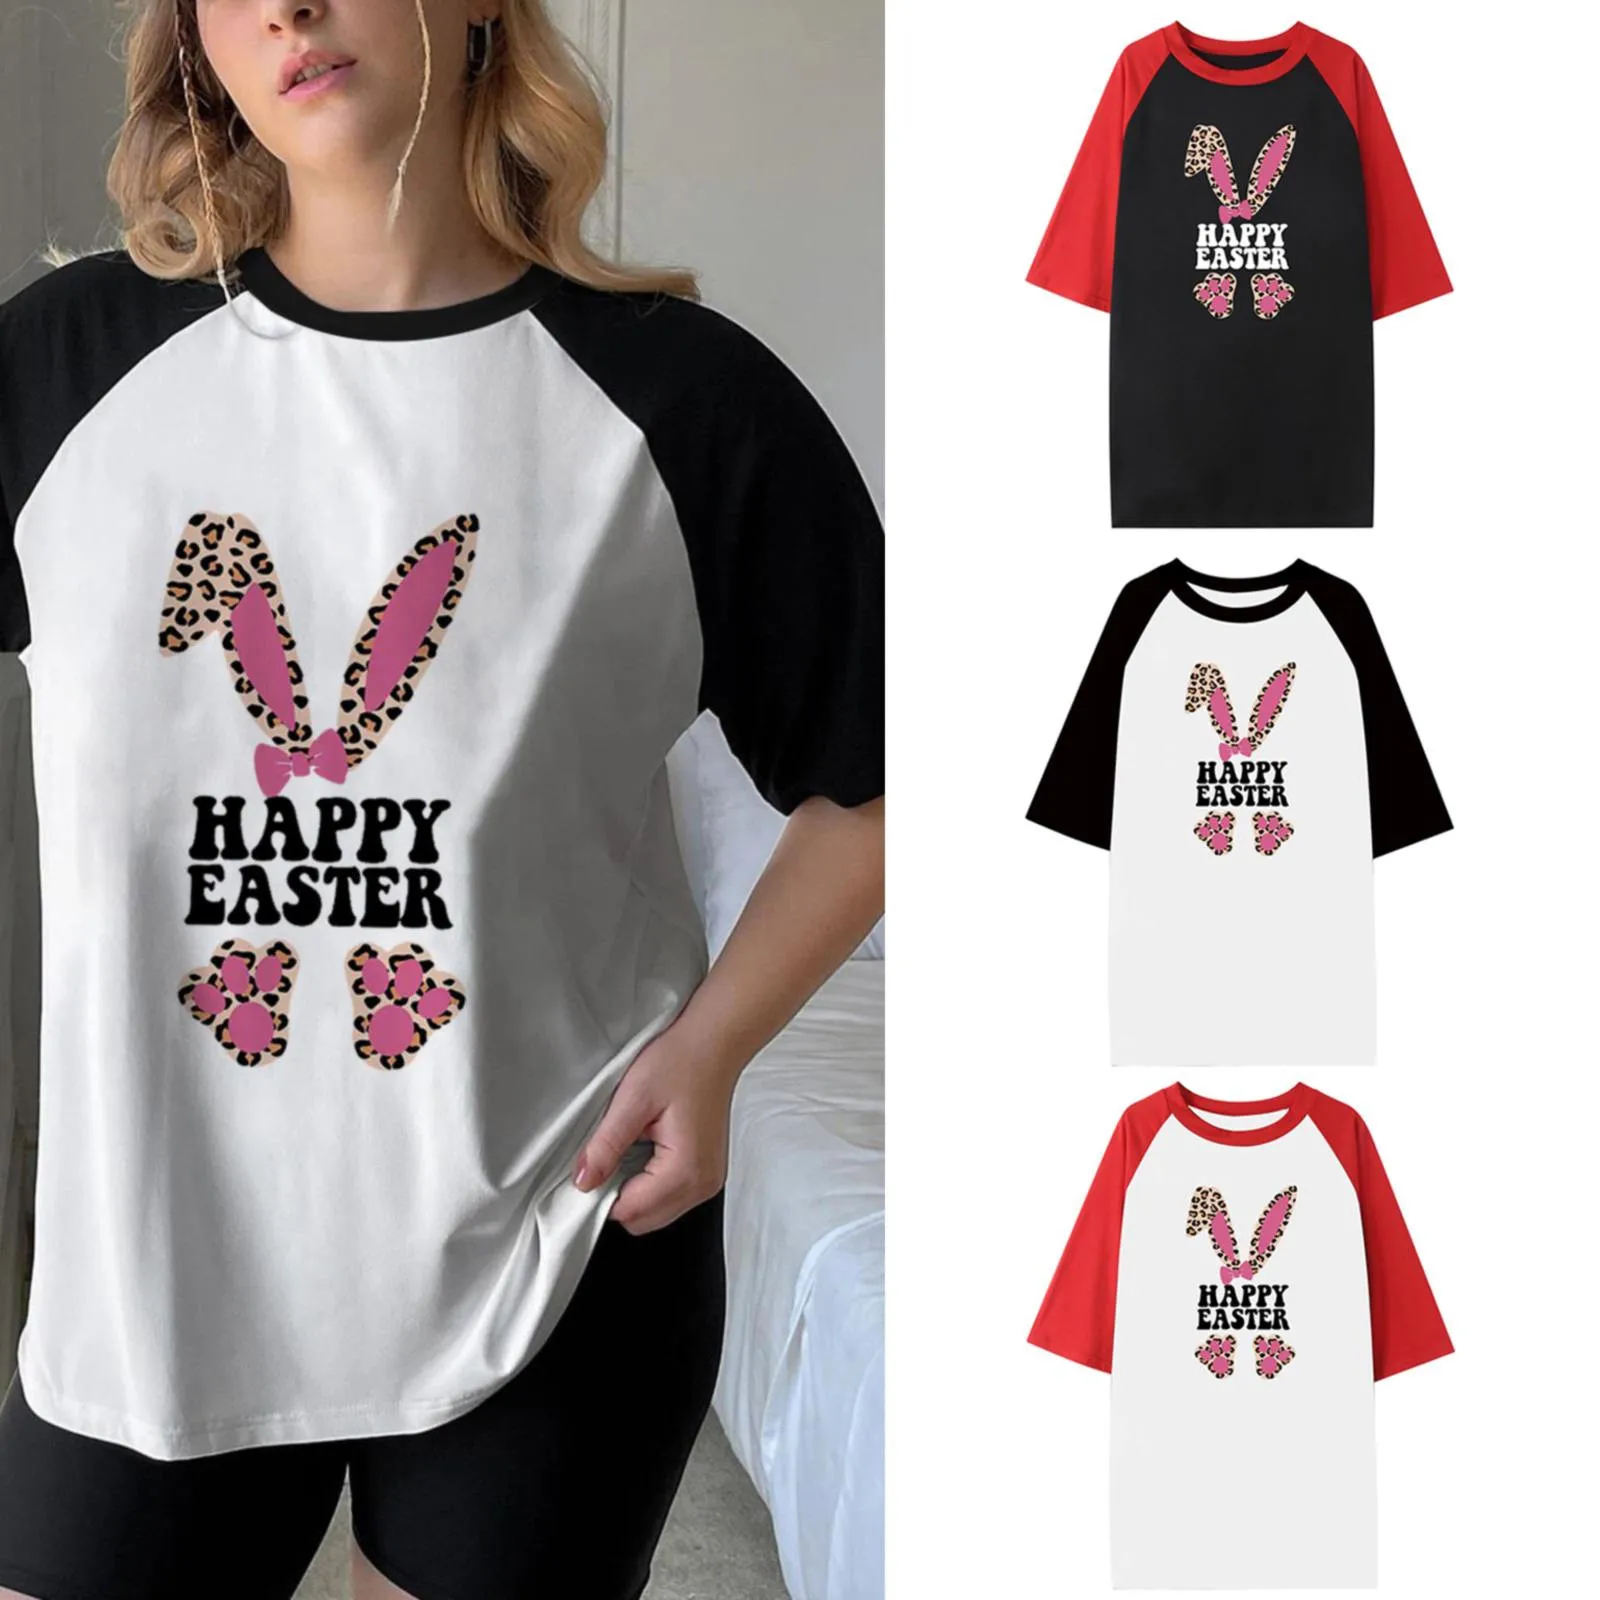 

HAPPY EASTER T Shirt Female Rabbit Printed Short Sleeve Shoulder 3xwomen Blouses with Button Fronts Tops Shirts for Women